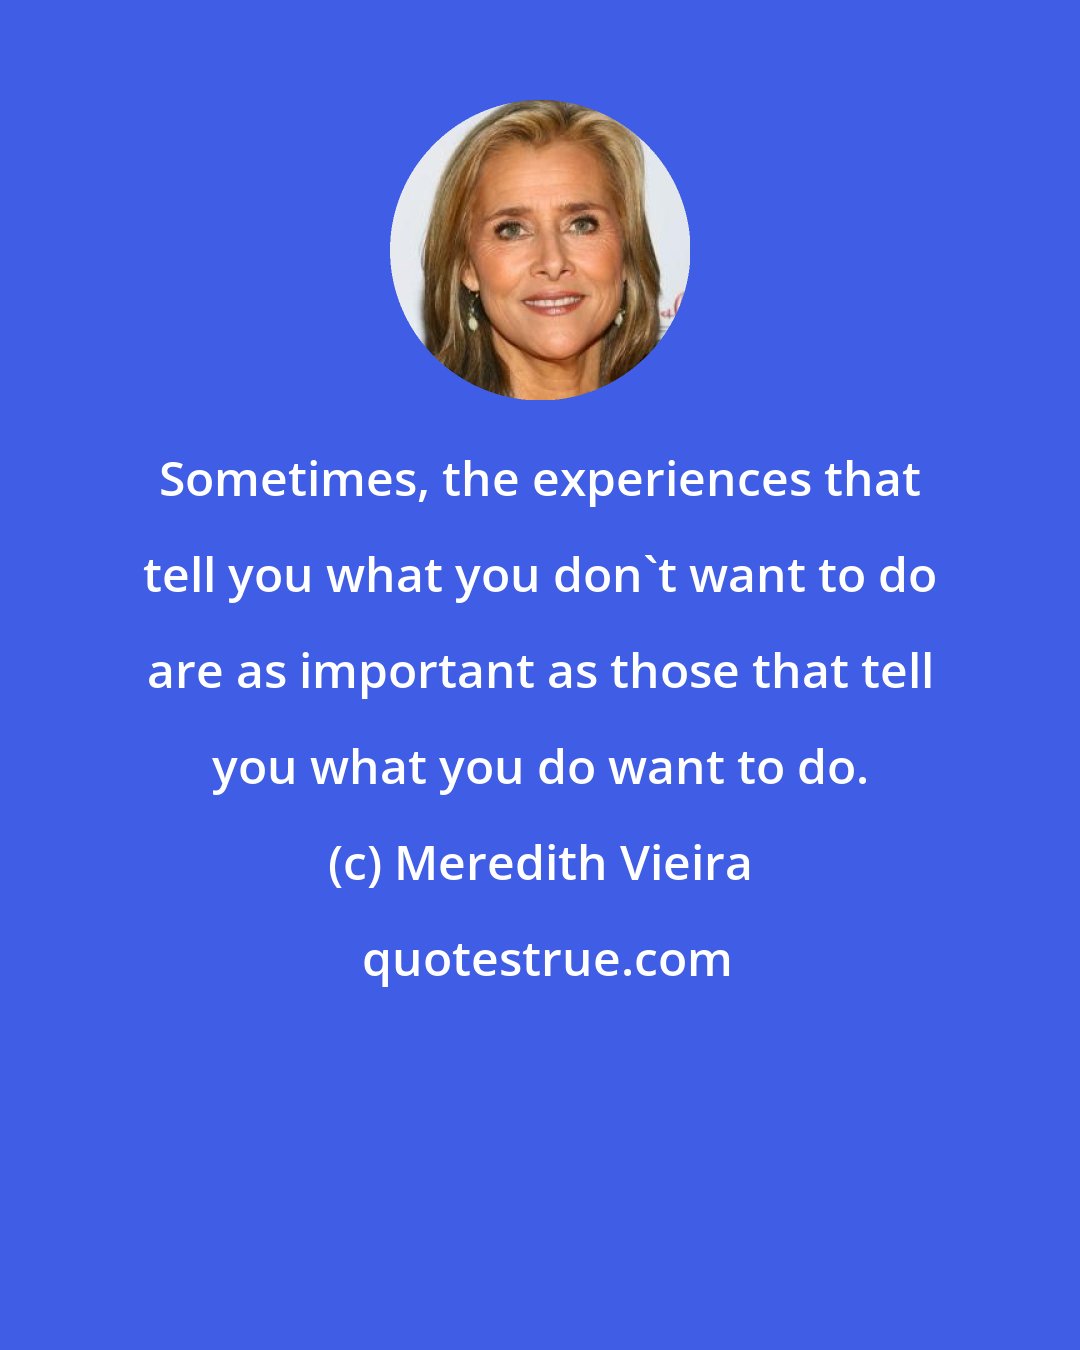 Meredith Vieira: Sometimes, the experiences that tell you what you don't want to do are as important as those that tell you what you do want to do.